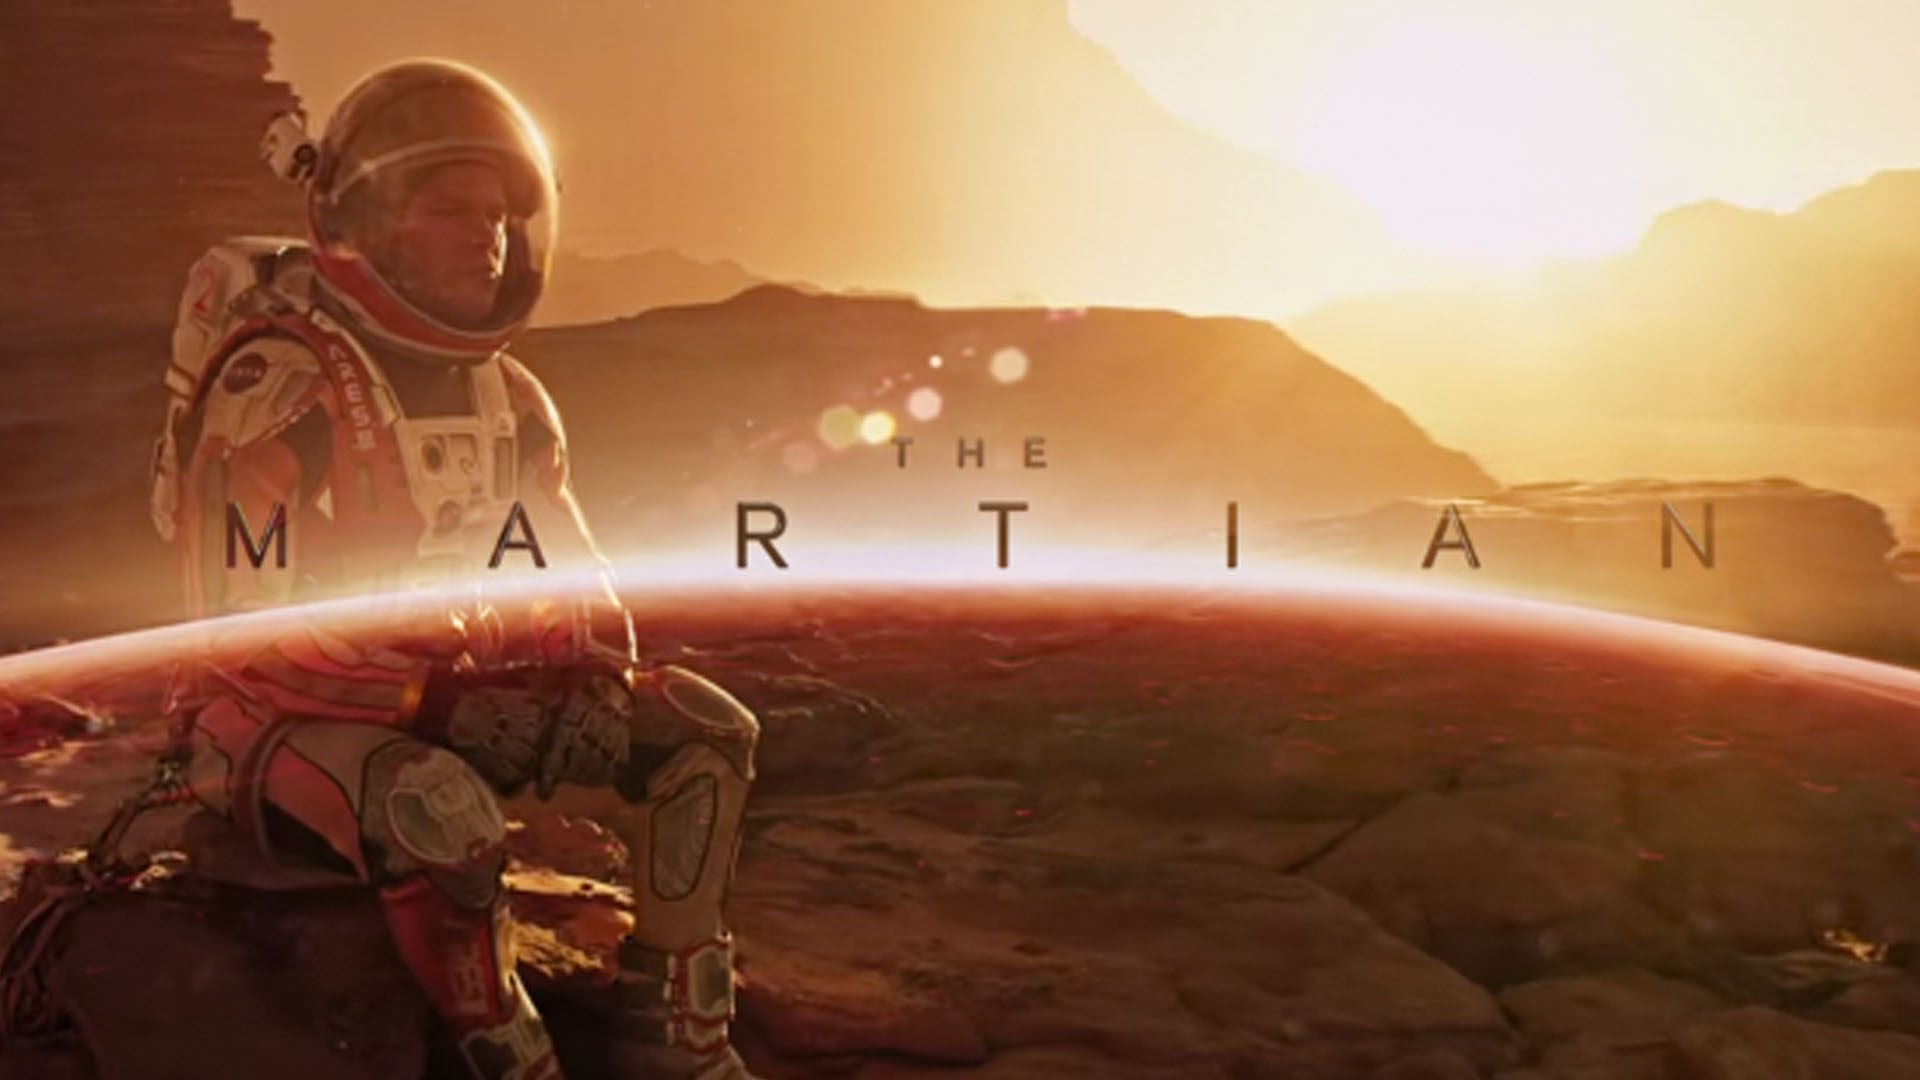 the The Martian (English) full movie 1080p hd